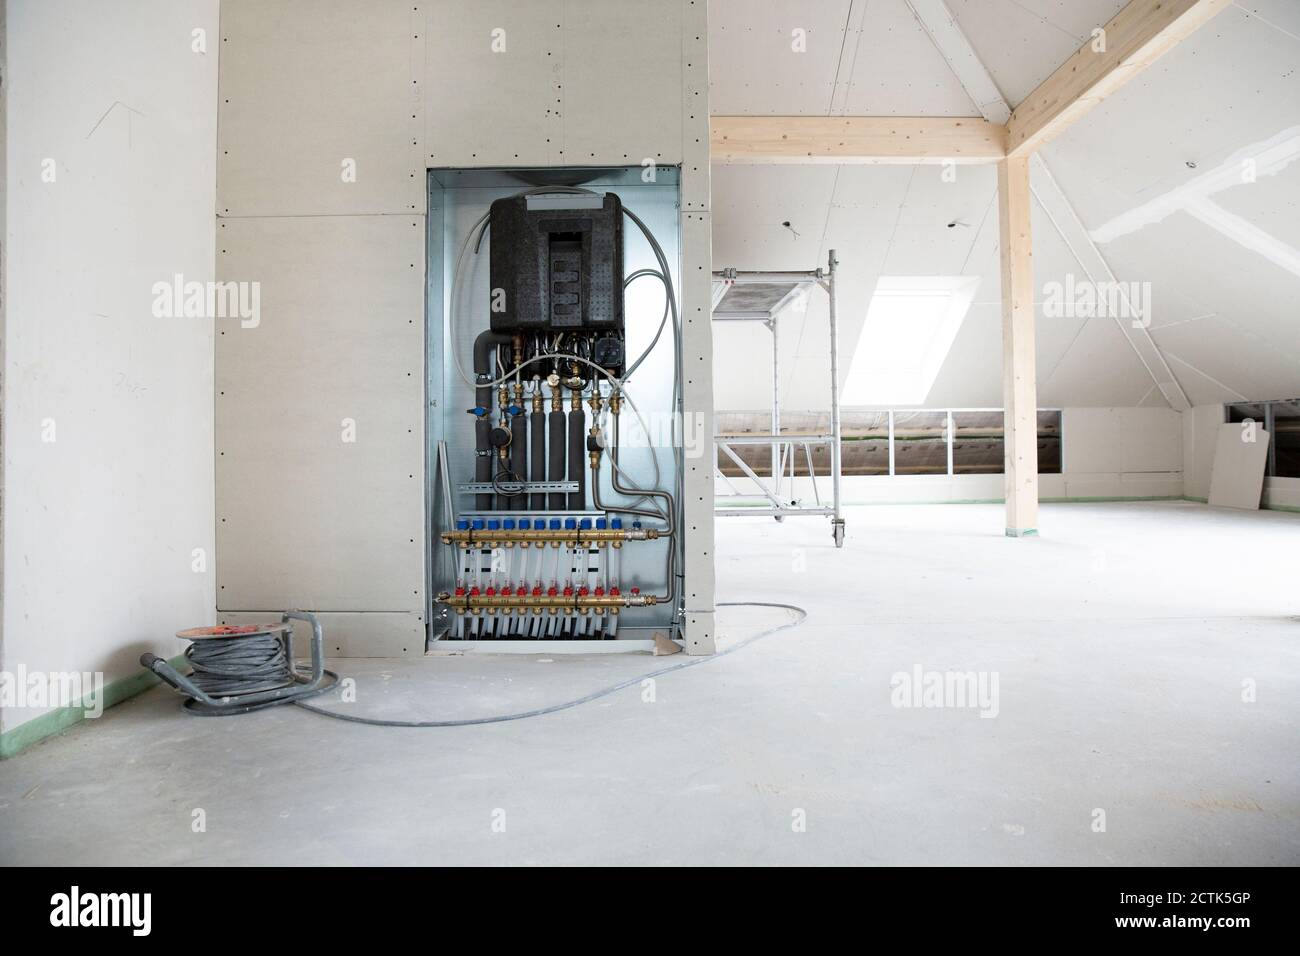 Electrical equipment in house under construction Stock Photo